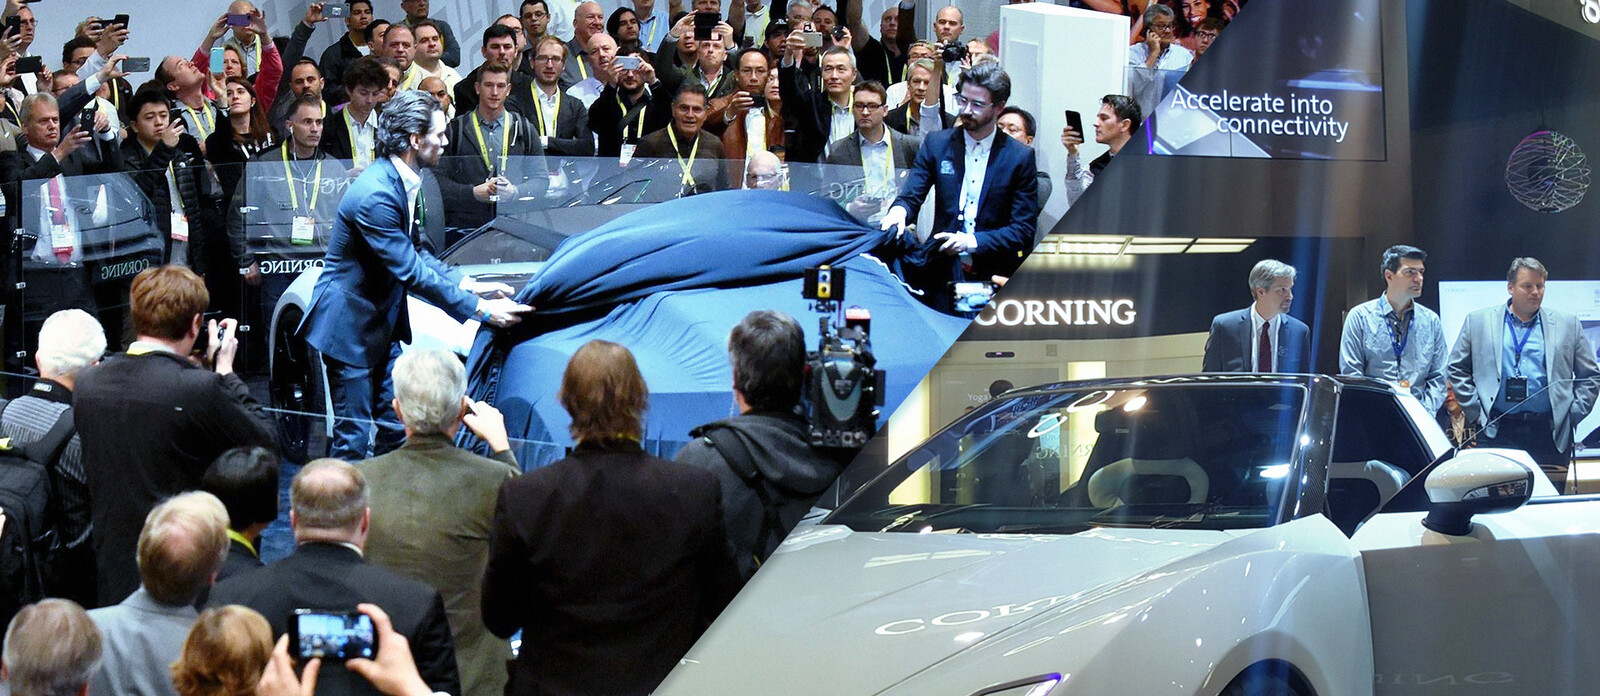 For CES 2017, I had the opportunity to lead the UX / UI design of Corning's electric concept sports car, the Corning1. It was thrilling to work with such a talented team of engineers and programmers to make this project a reality.

